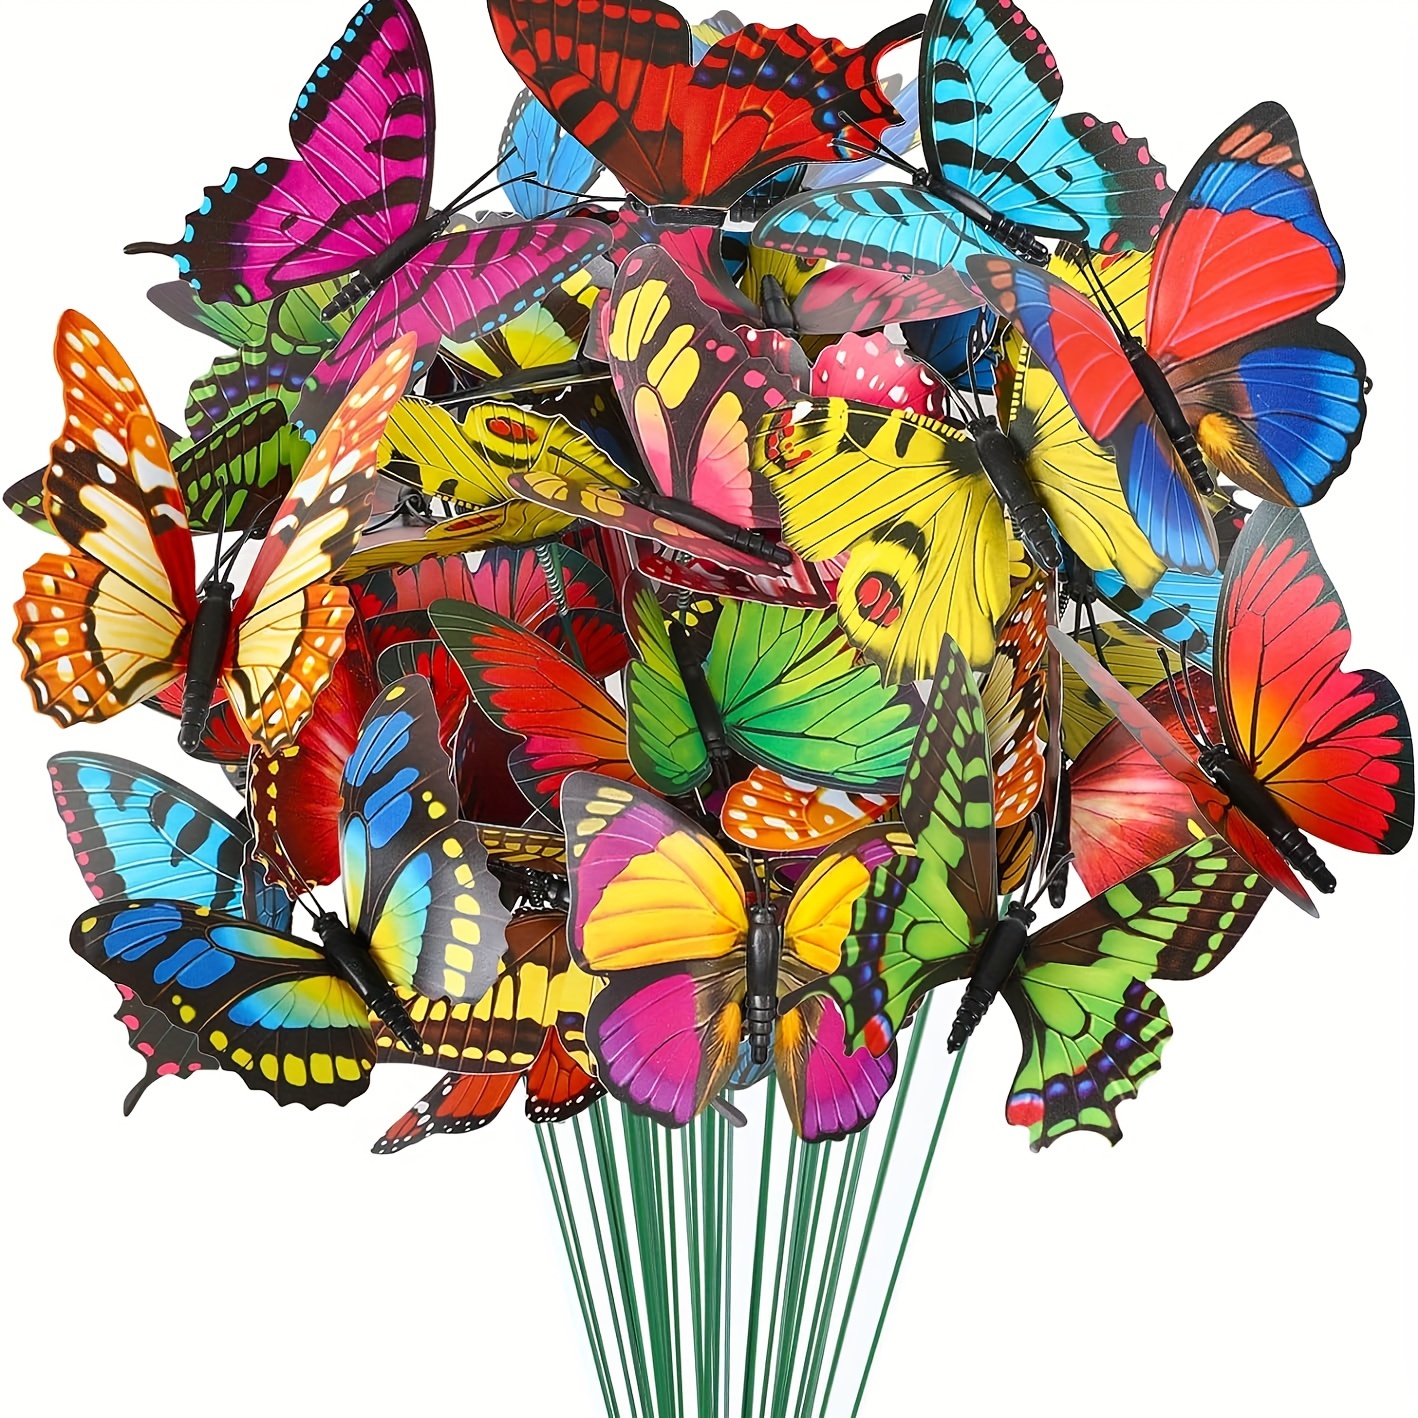 

30pcs Artificial Butterfly Garden Stakes - Plastic Outdoor Holiday Decorations For Valentine's Day, Graduation, Spring & Summer - Freestanding Flower Themed Yard Ornaments Without Electricity